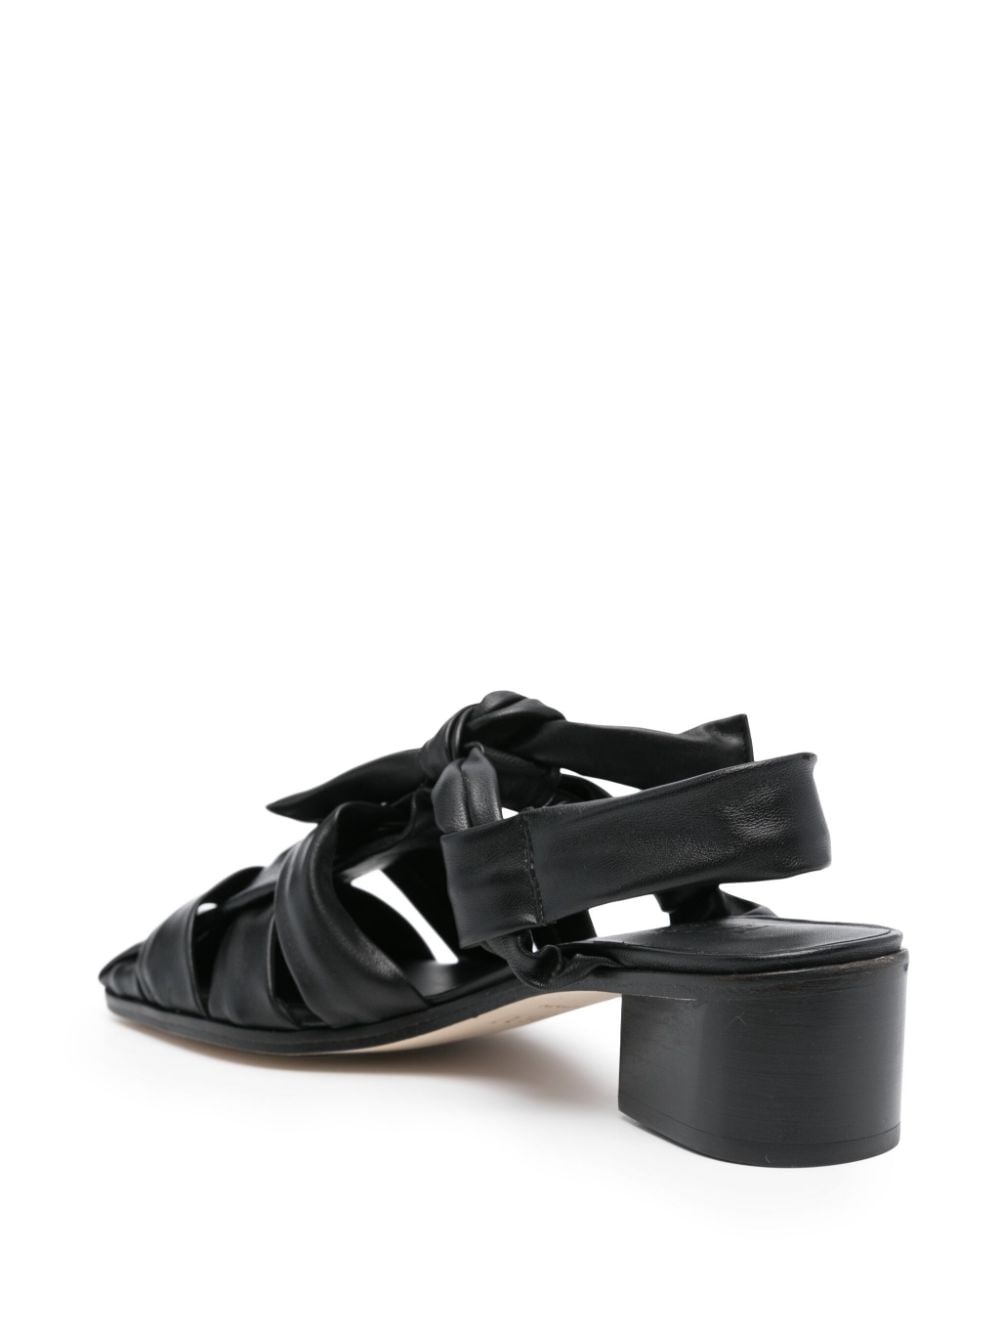 50mm leather sandals - 3